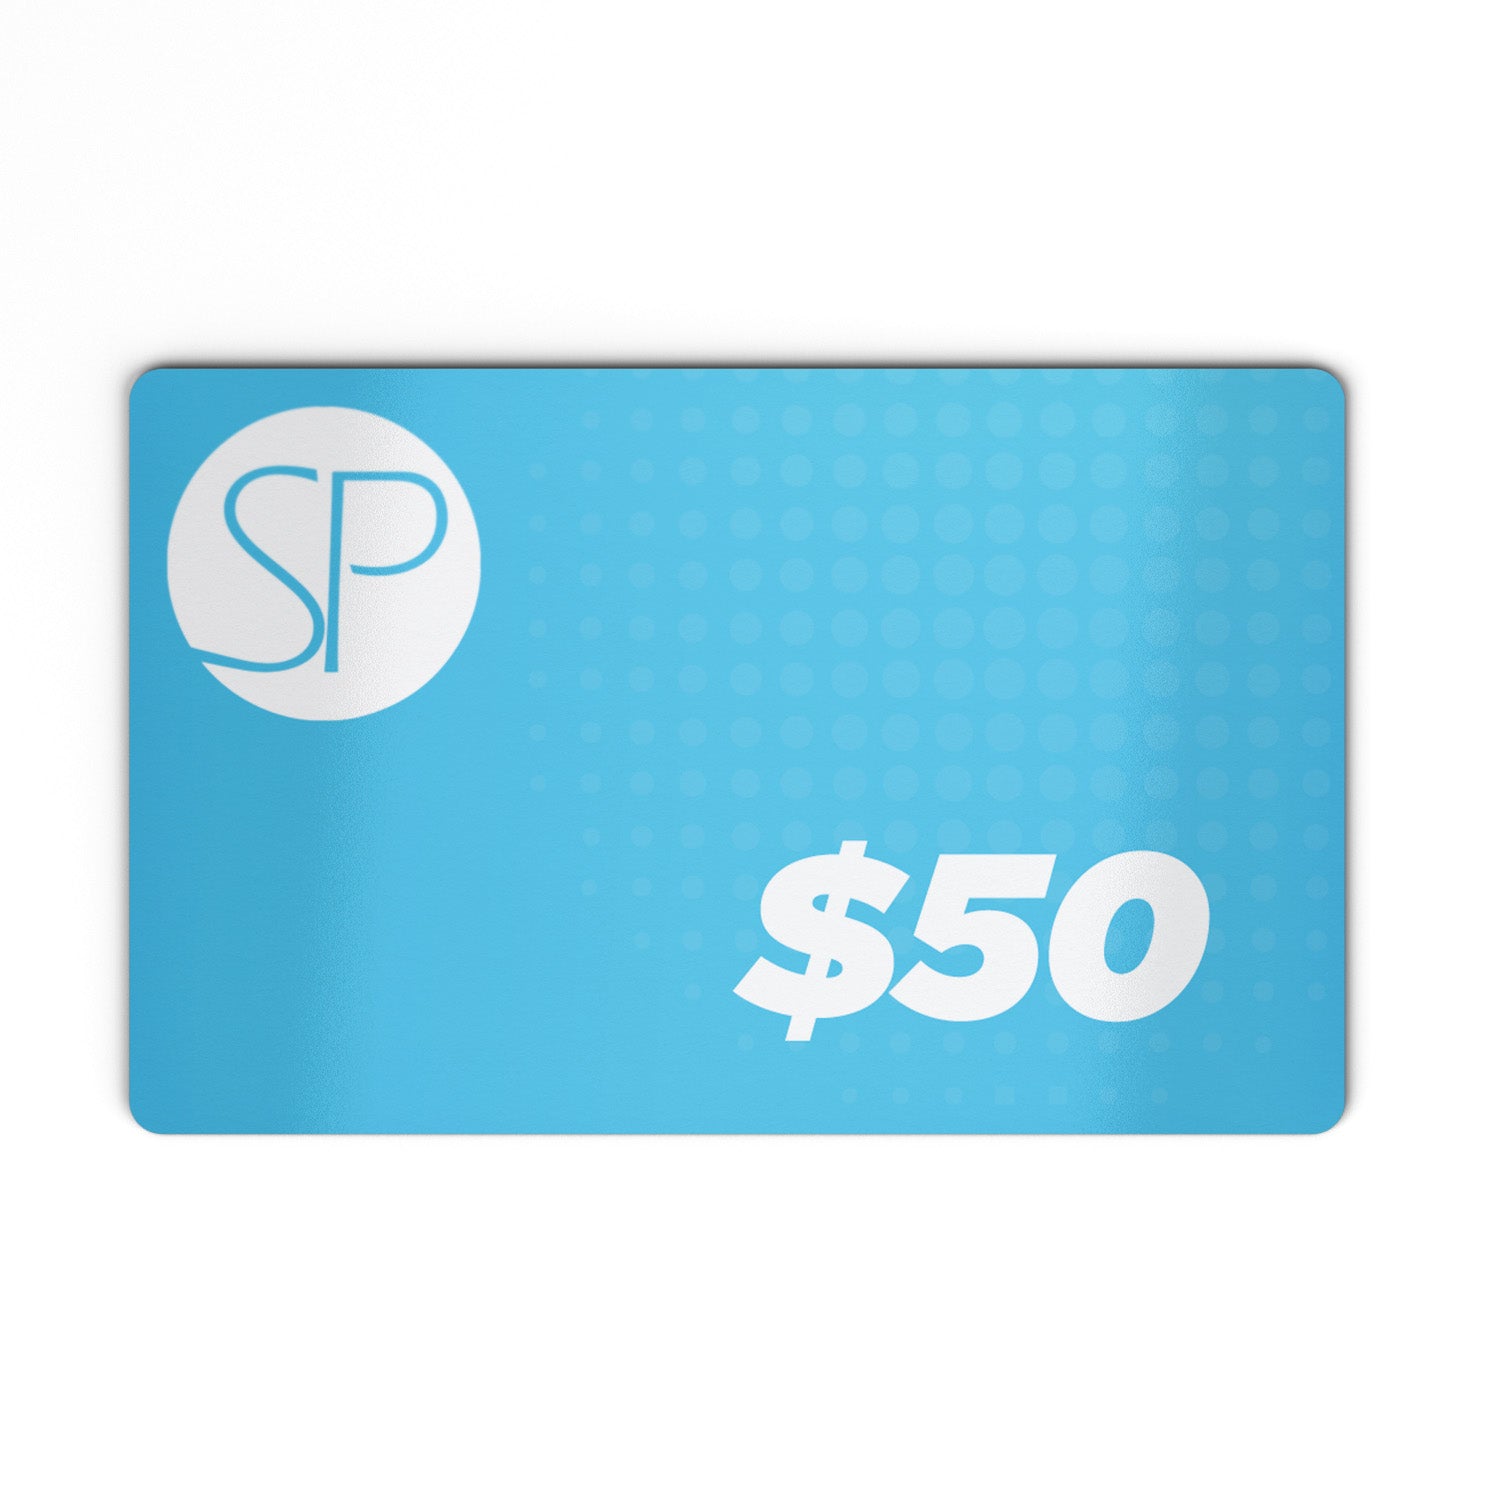 SParms Gift Card